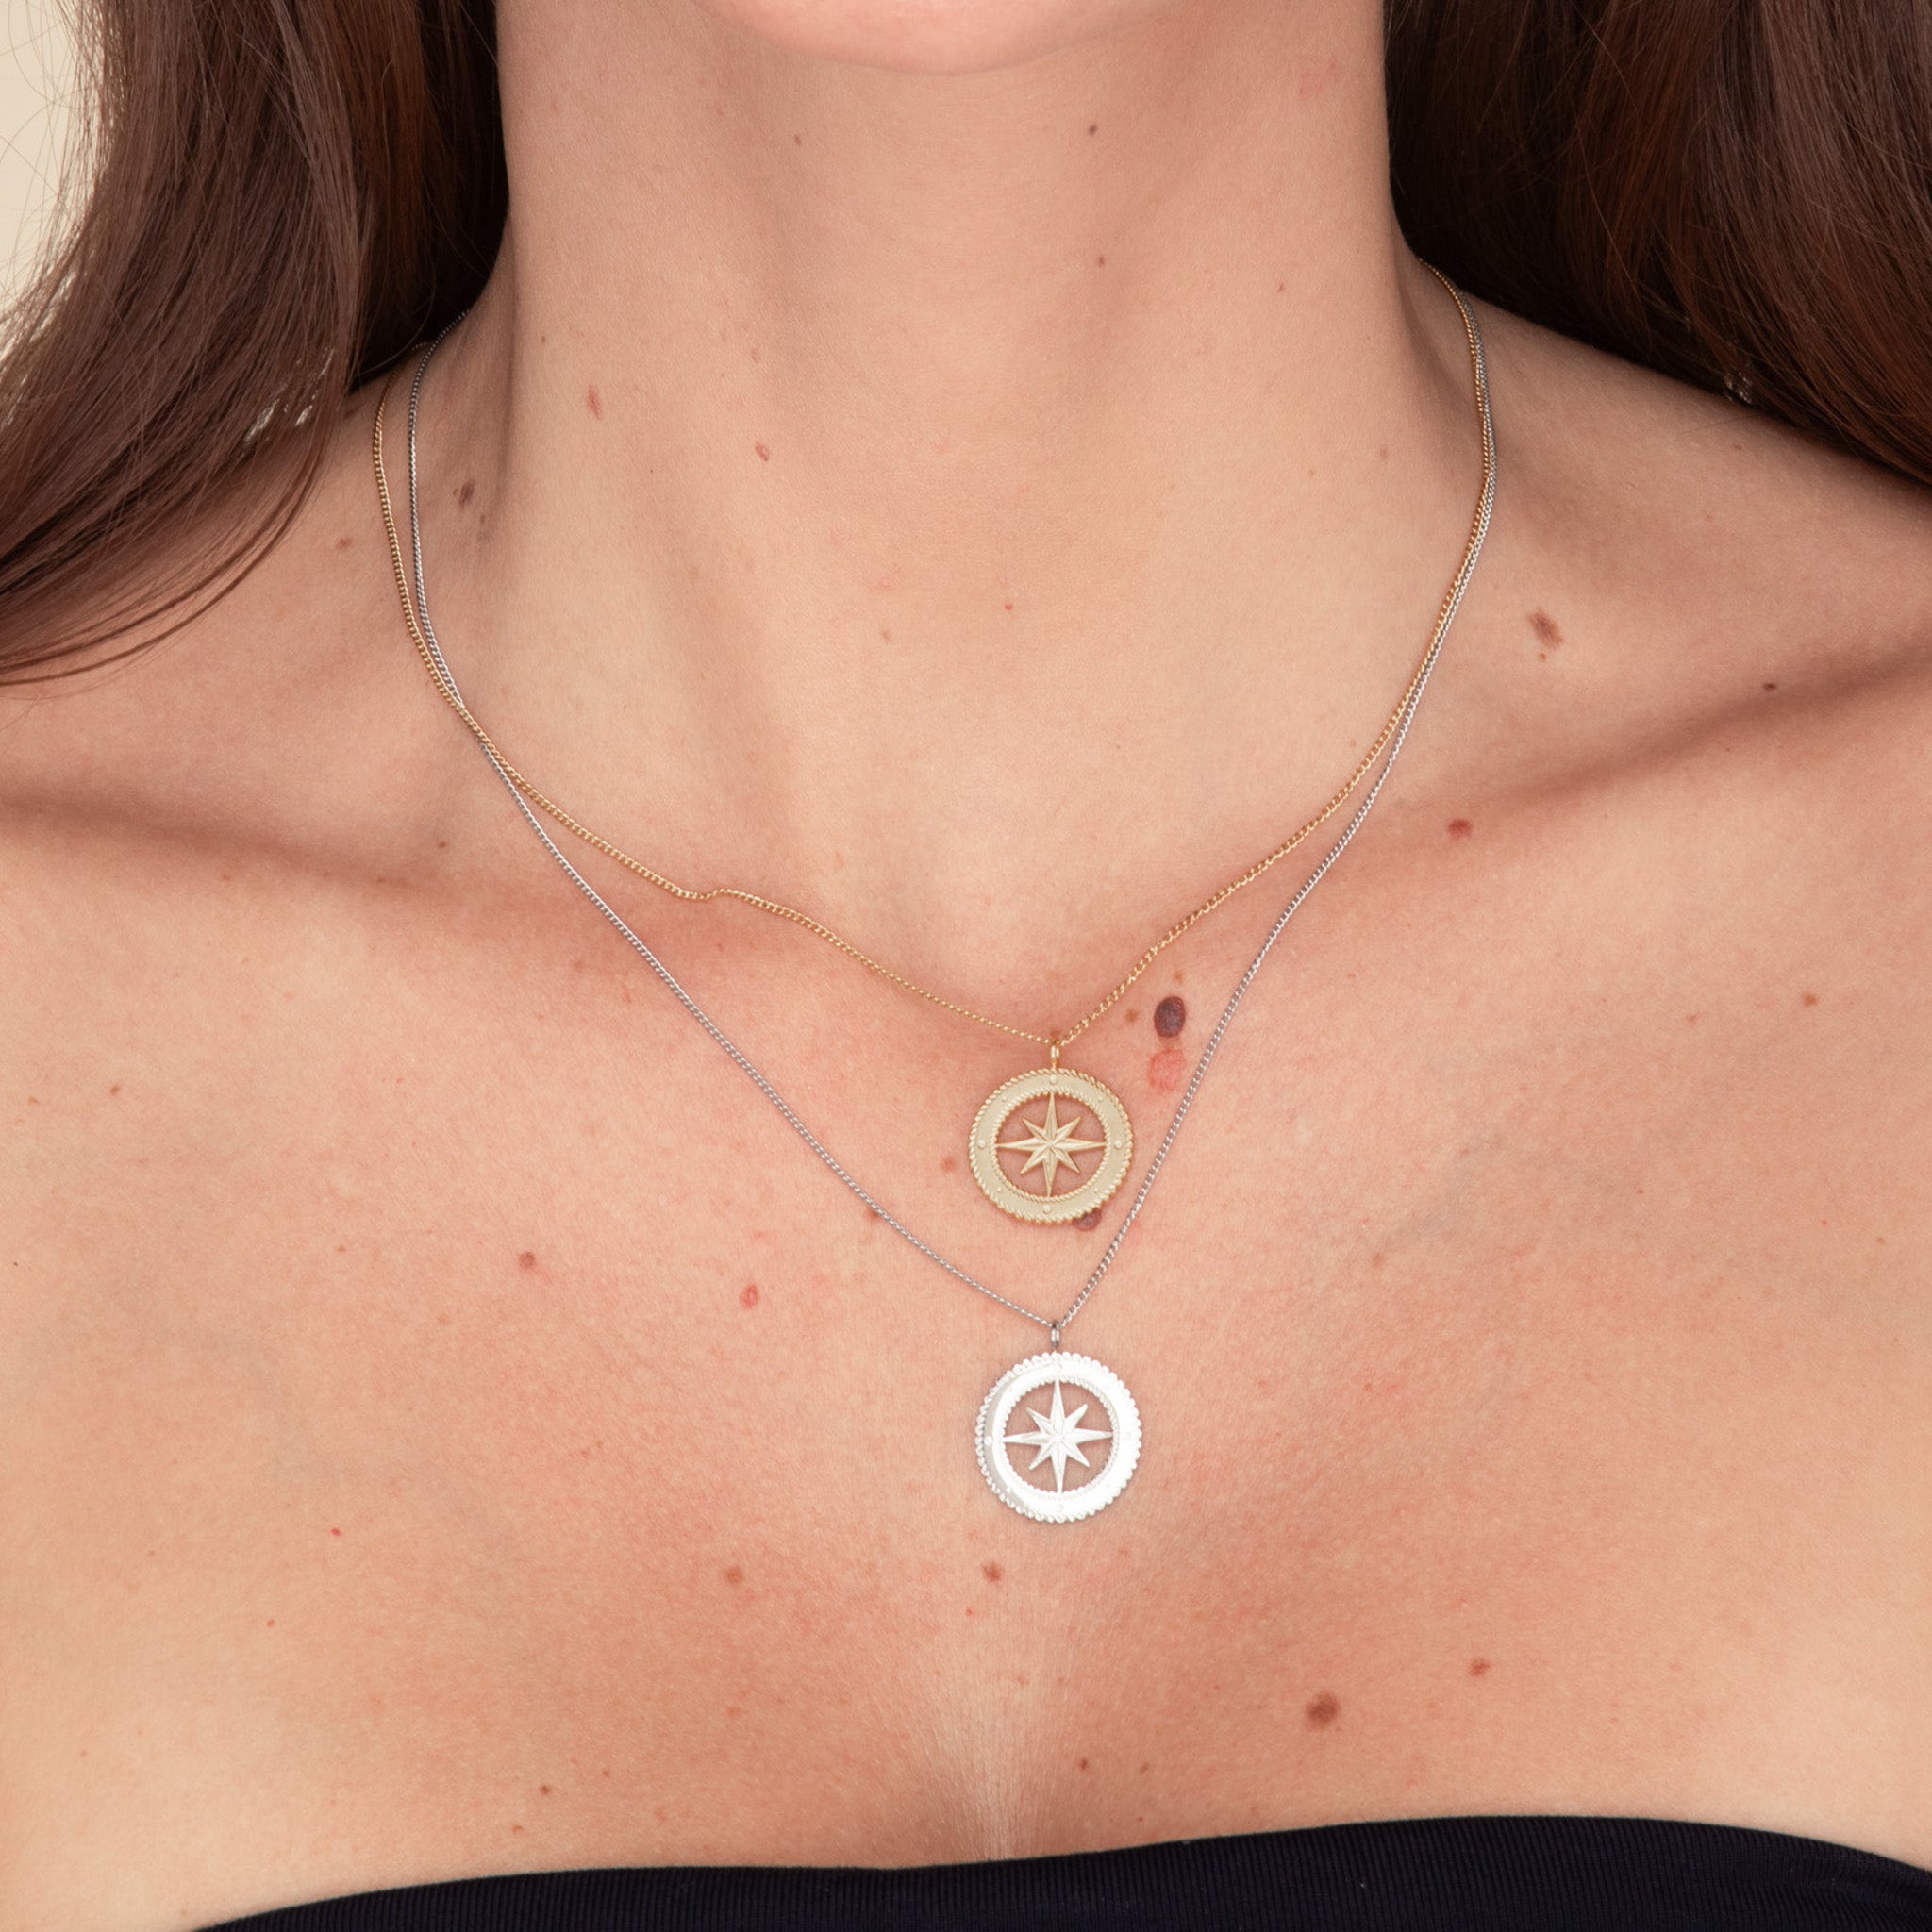 North Star Compass Necklace